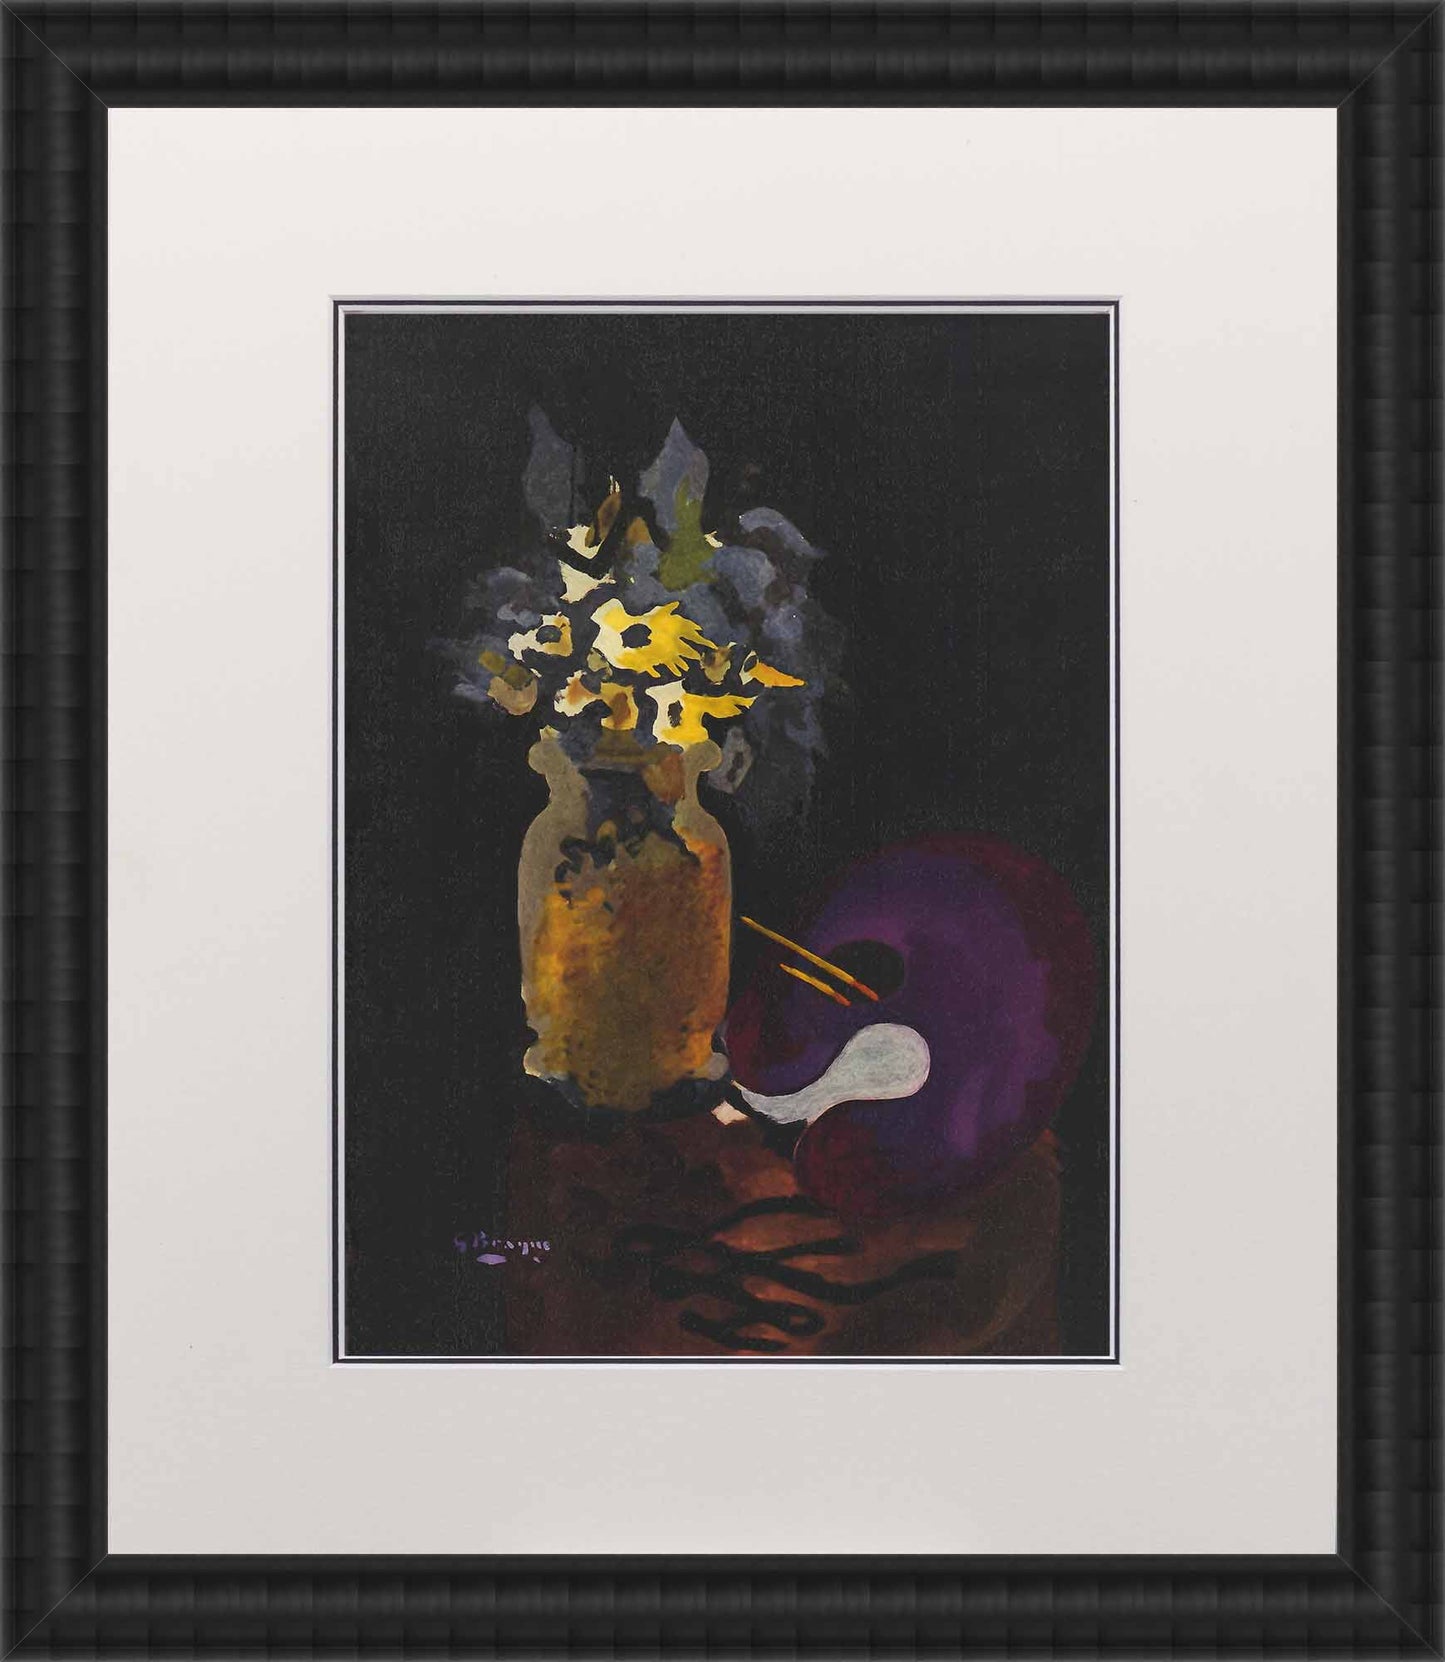 Georges Braque, "Untitled XIX"